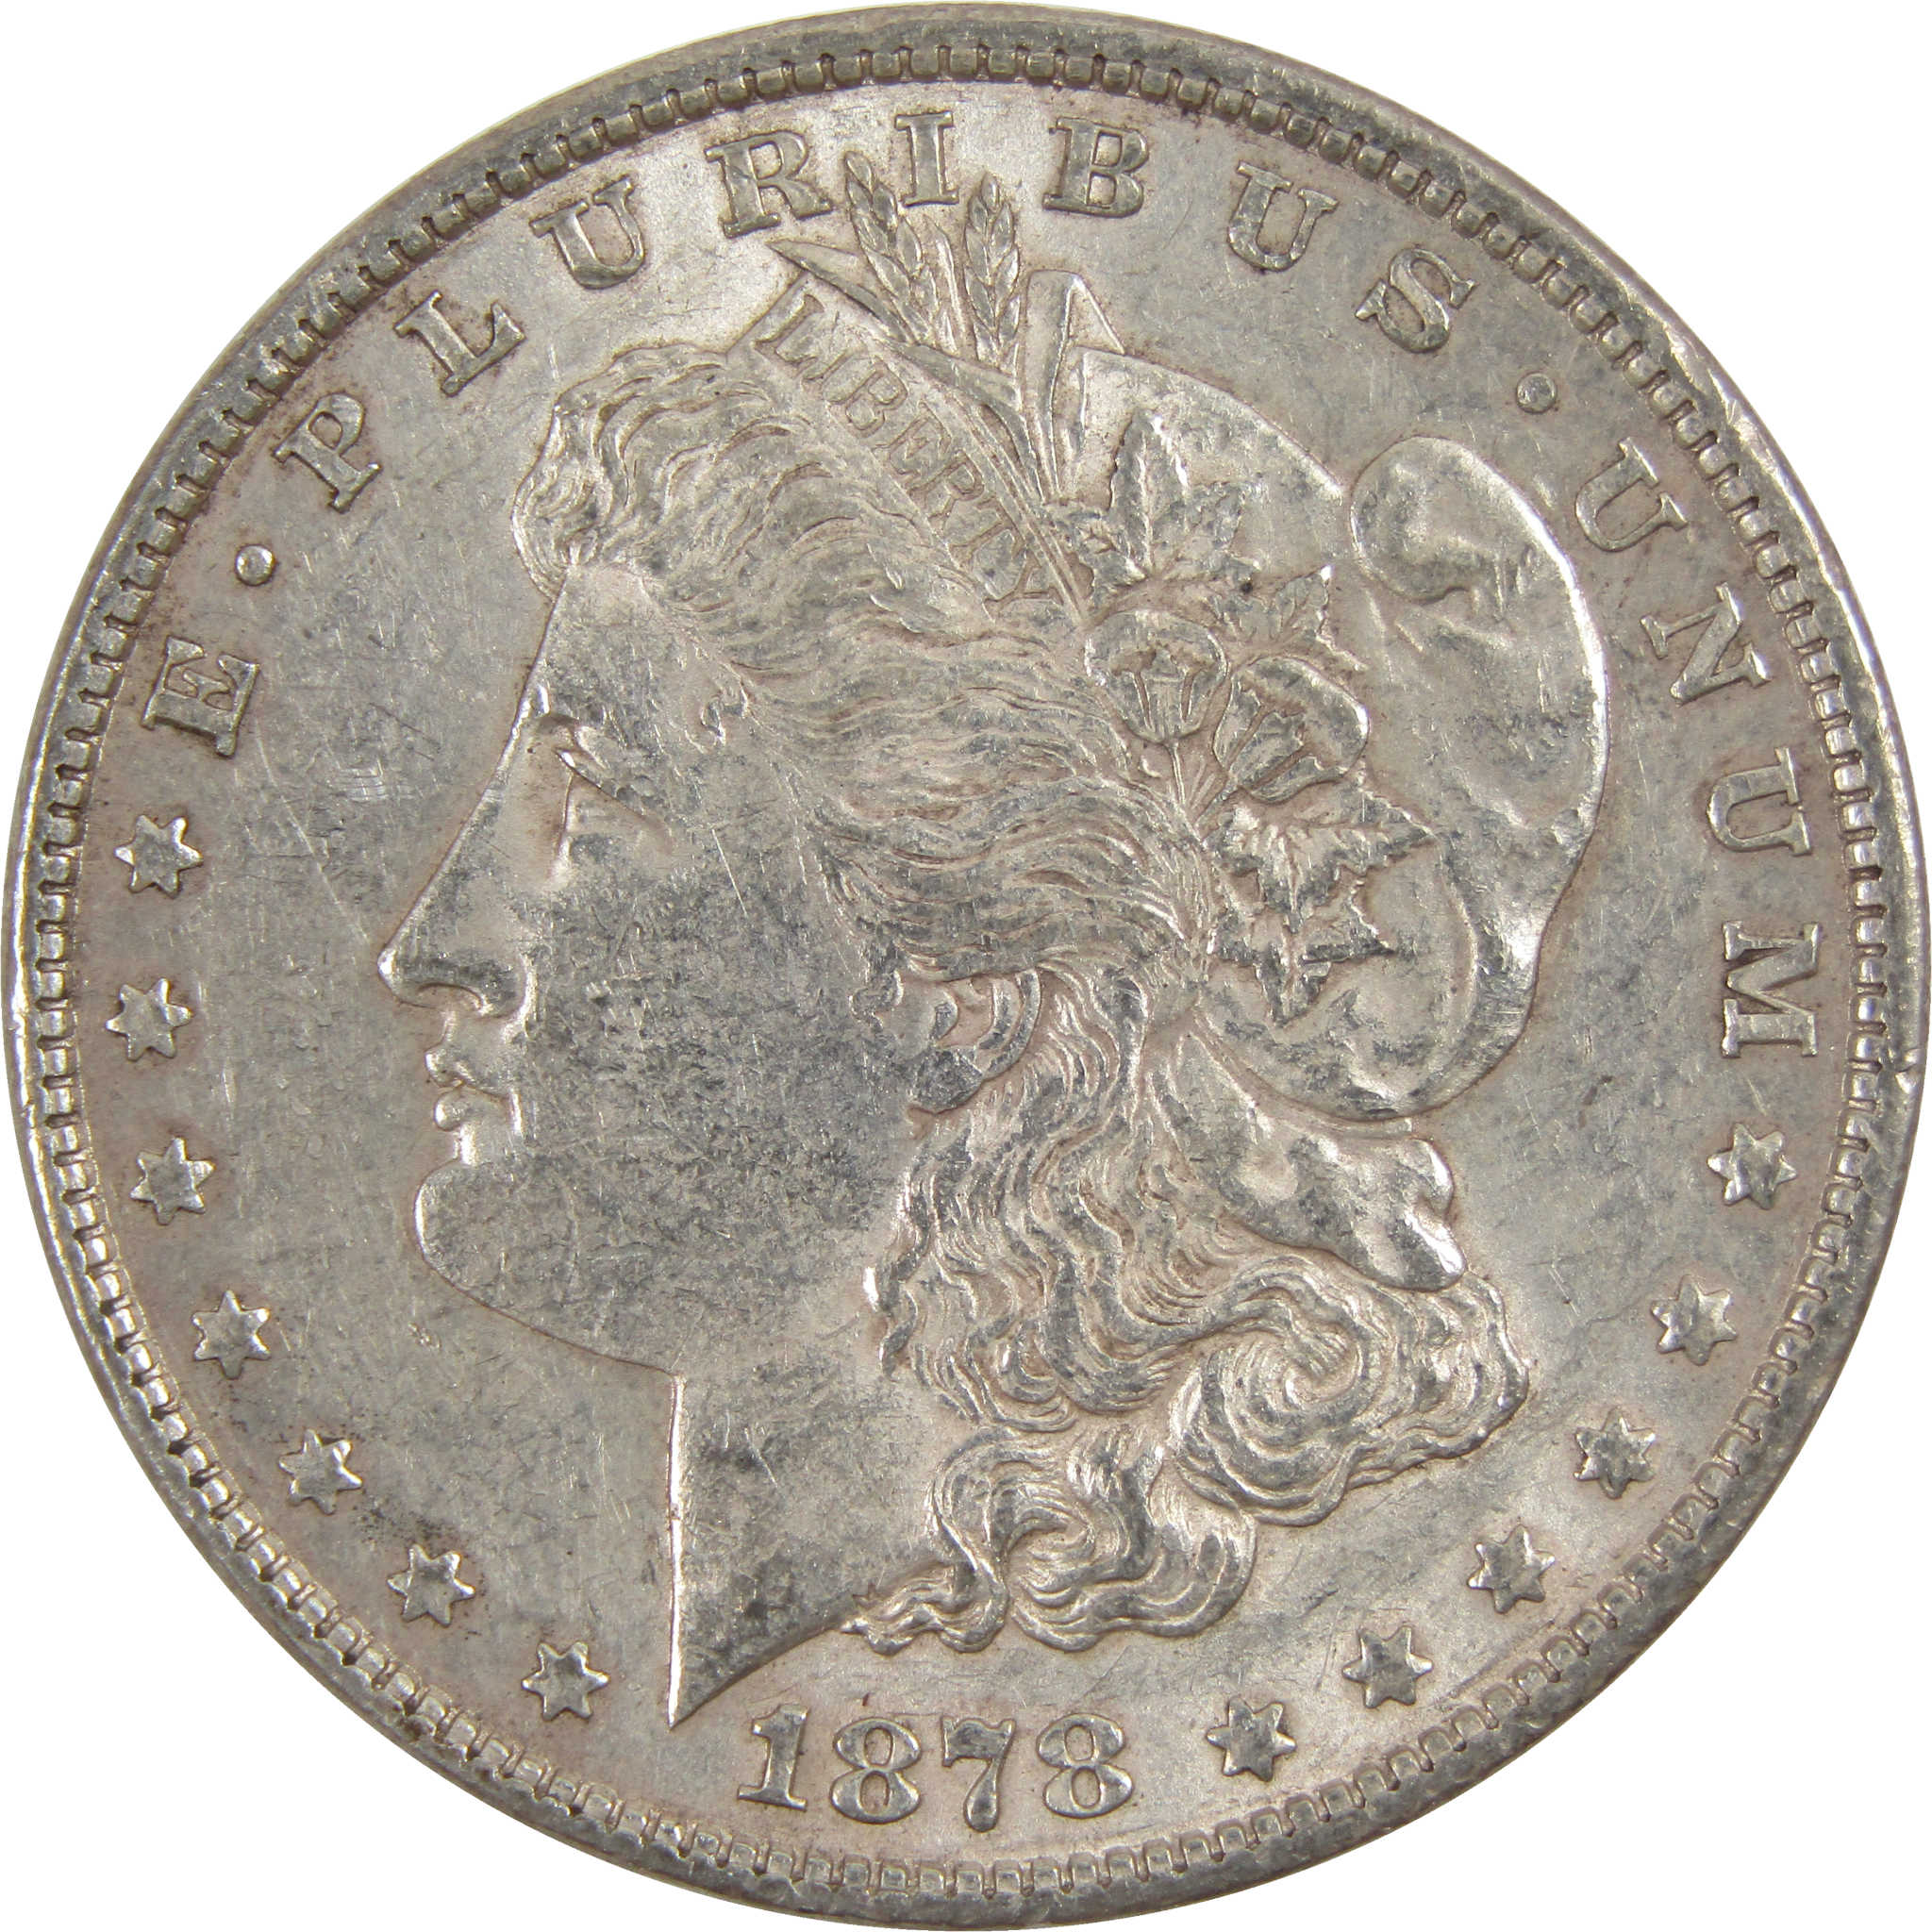 1878 7TF Rev 79 Morgan Dollar AU About Uncirculated Silver SKU:I8096 - Morgan coin - Morgan silver dollar - Morgan silver dollar for sale - Profile Coins &amp; Collectibles